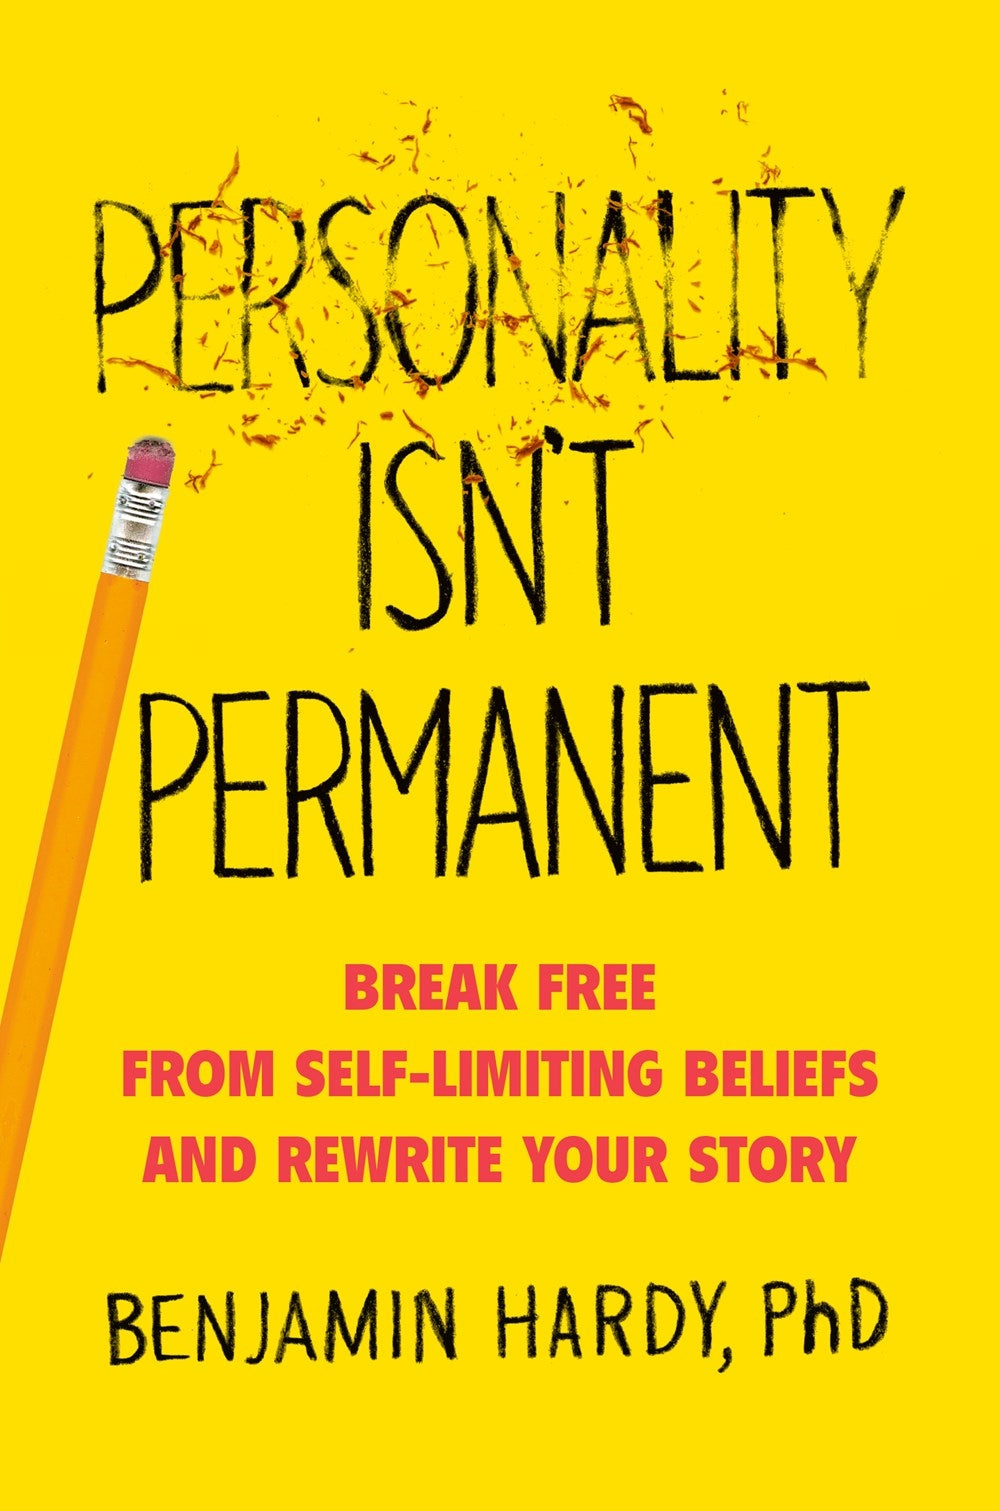 Personality Isn't Permanent: Break Free from Self-Limiting Beliefs and Rewrite Your Story (HB)